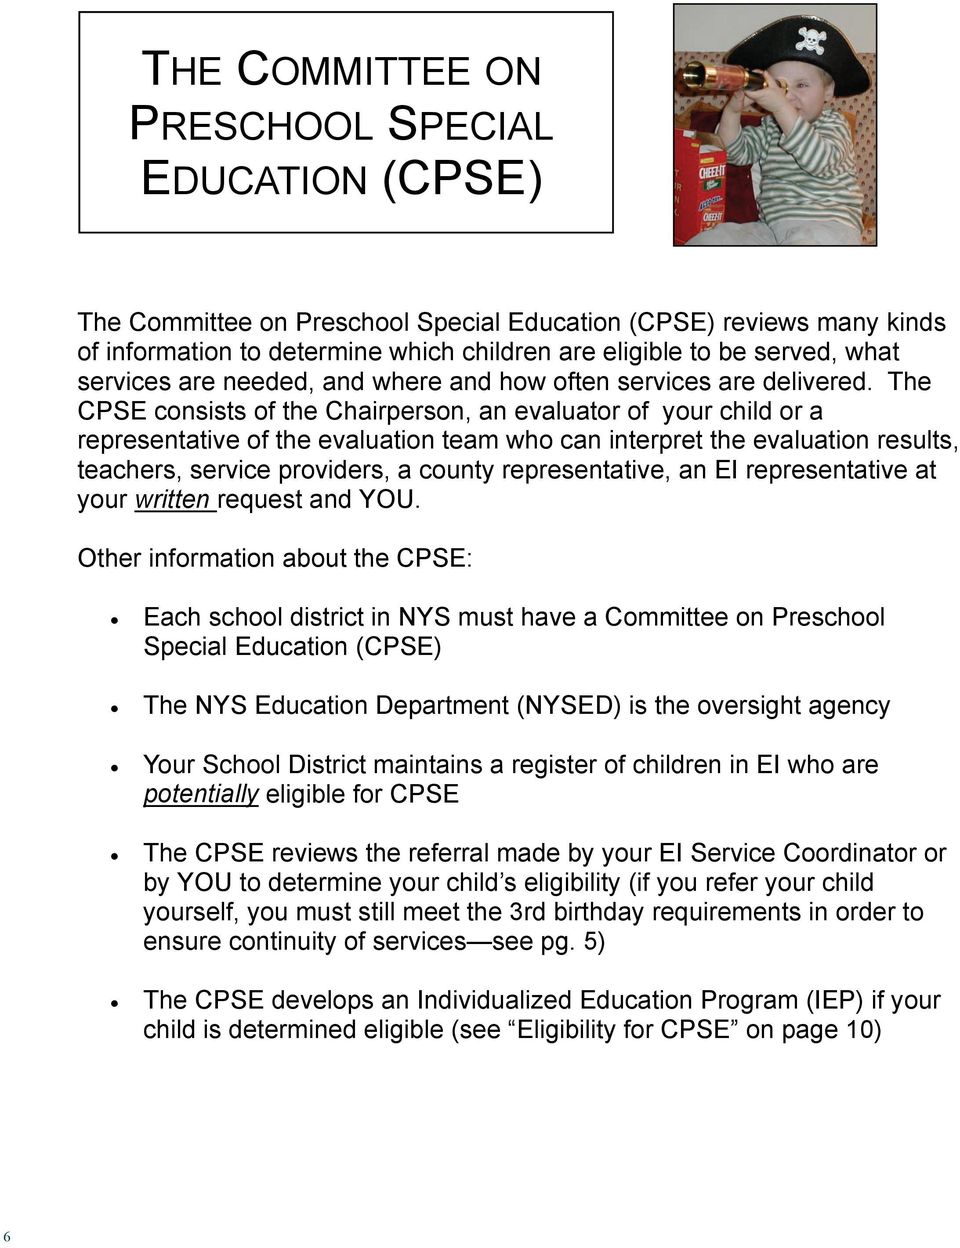 The CPSE consists of the Chairperson, an evaluator of your child or a representative of the evaluation team who can interpret the evaluation results, teachers, service providers, a county